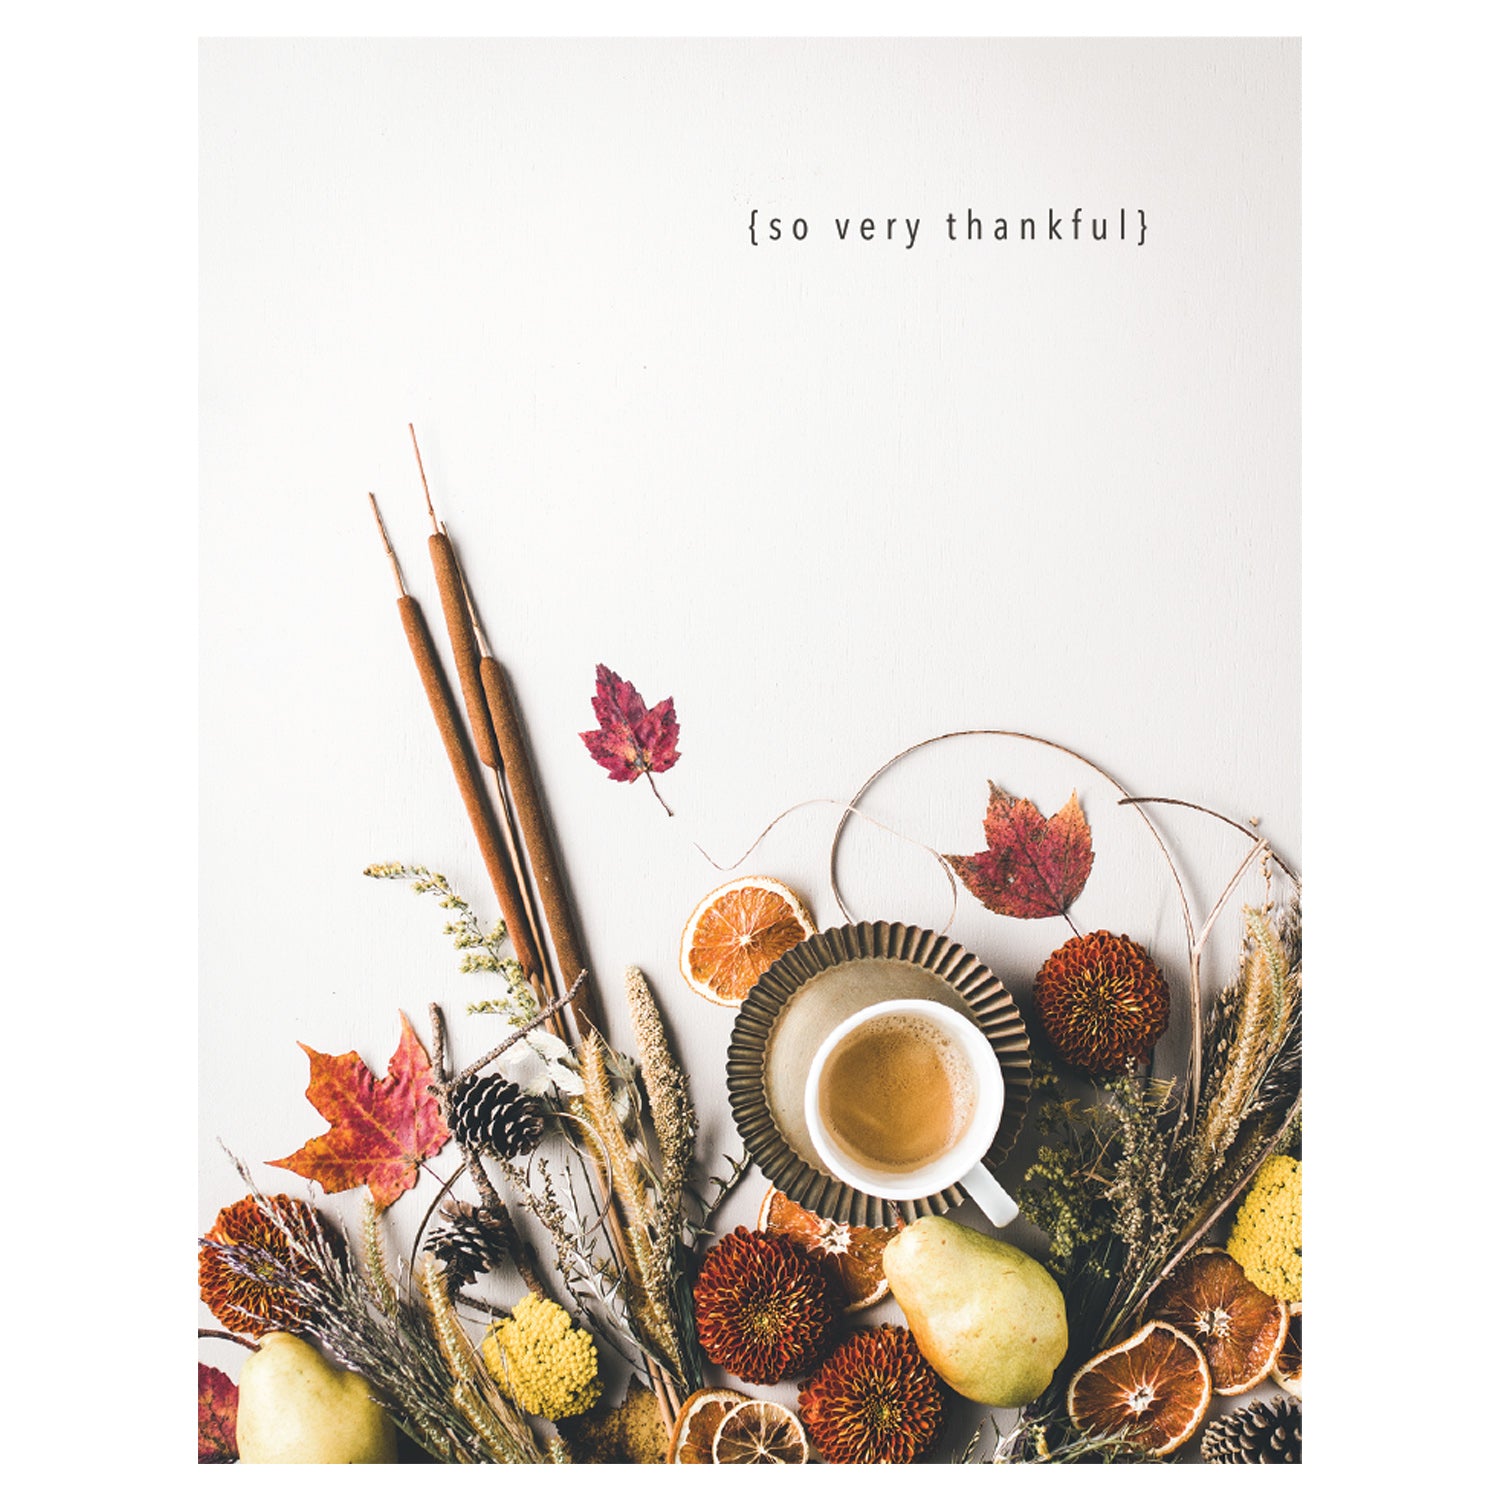 A photo of a dense spray of various fall foliage, dried fruits, and a cup of tea packed into the lower third of a white background, with &quot;{so very thankful}&quot; printed across the top of the card.